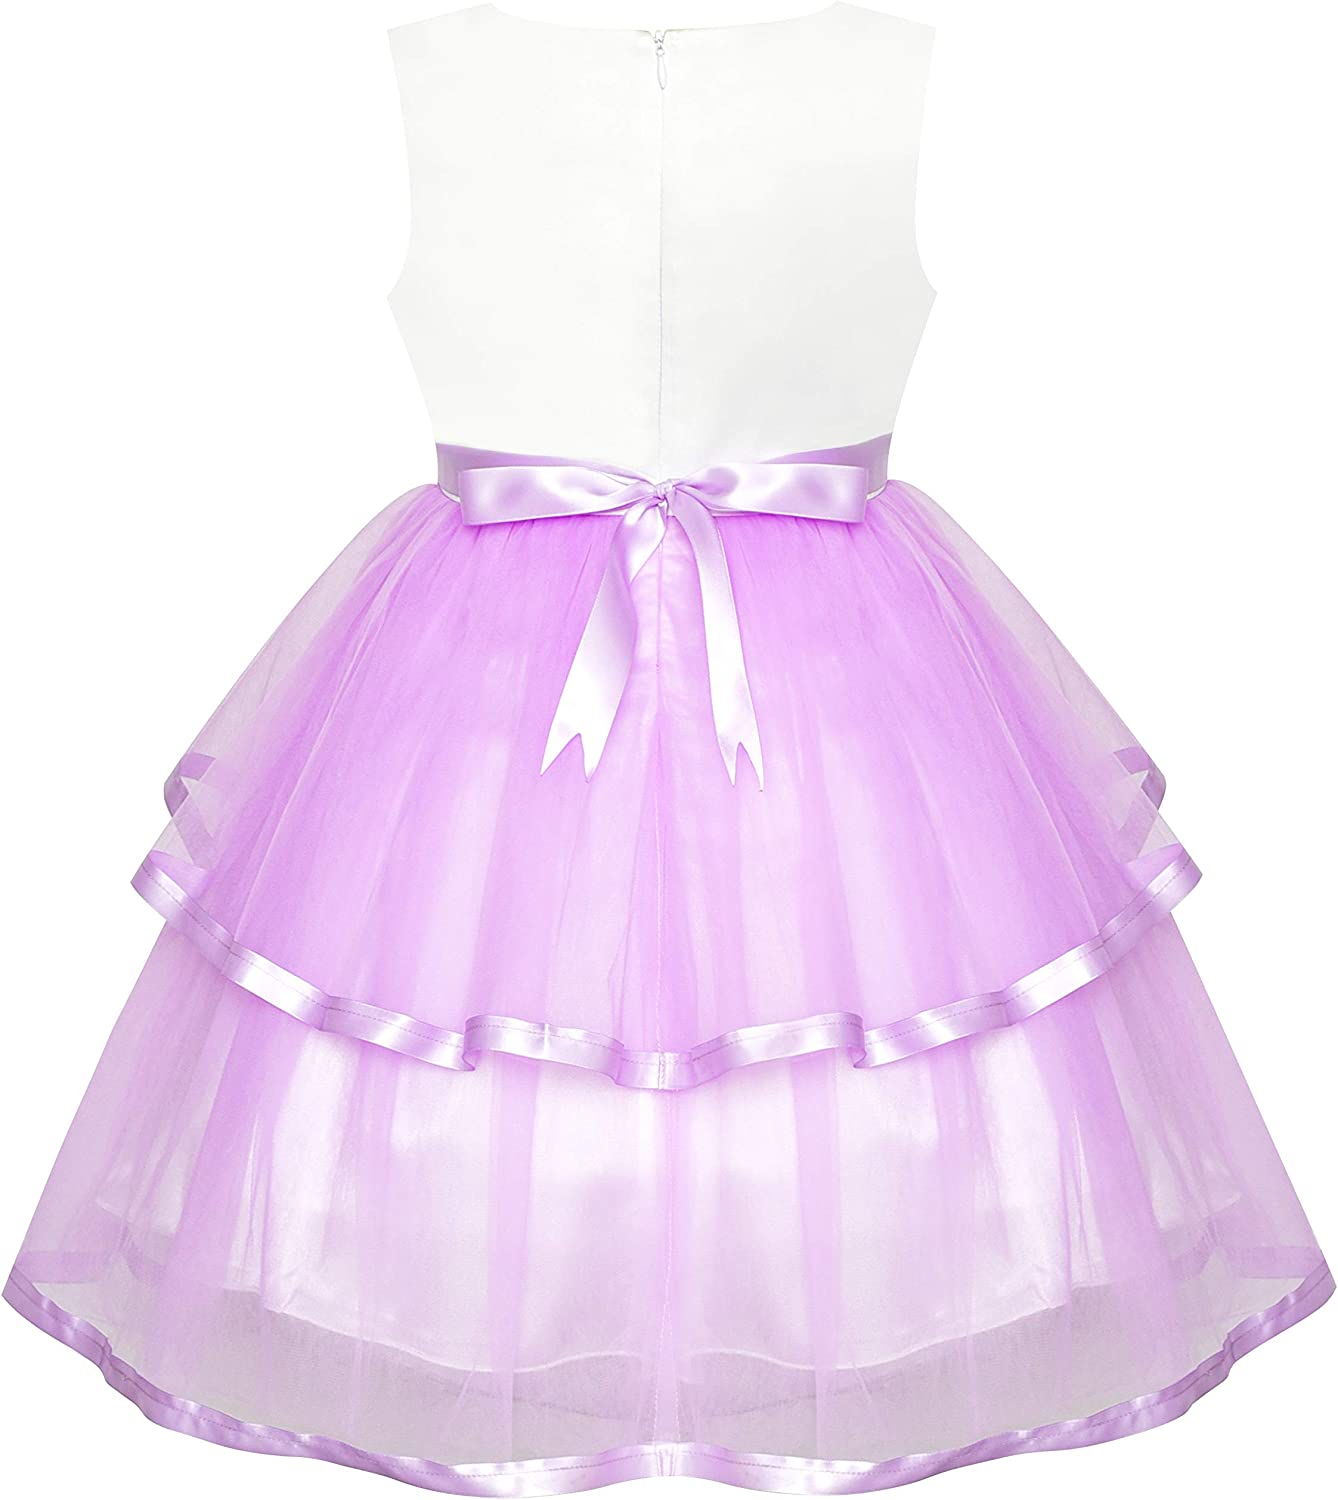 Purple Tiered Skirt Flower Girls Dress - Perfect for Weddings, Birthday Parties, and Special Occasions!